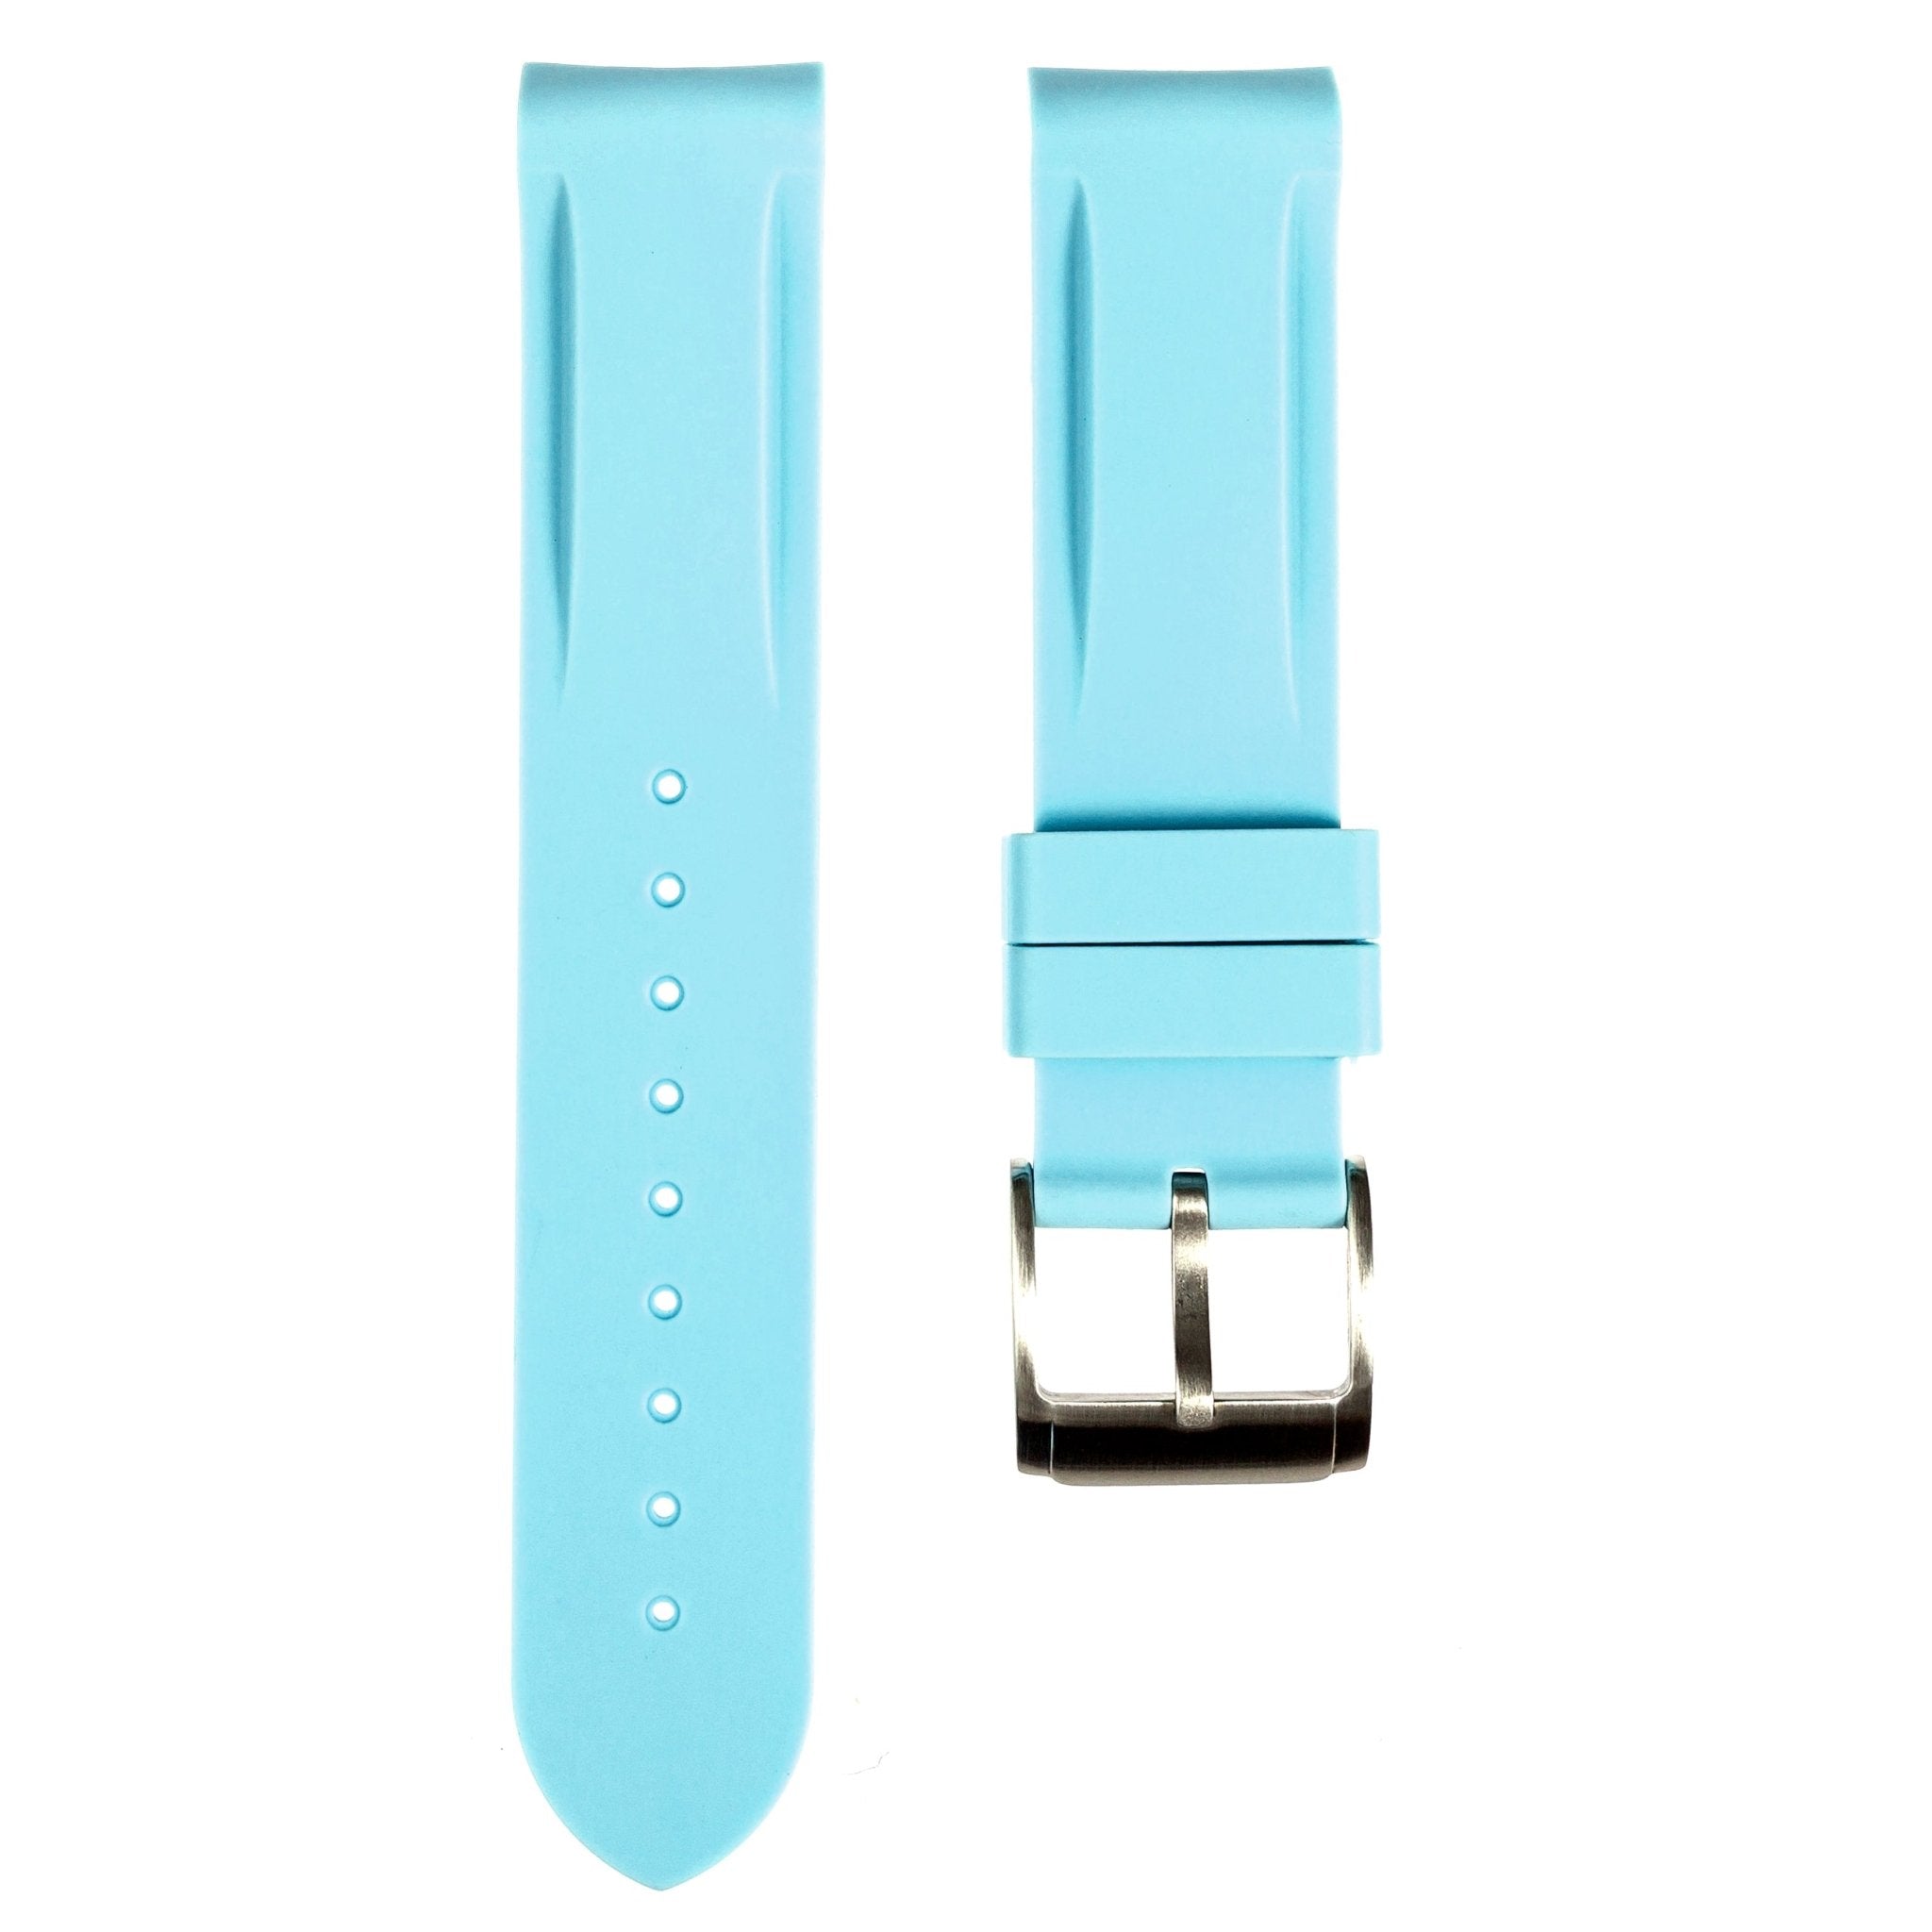 Paramount Curved End Premium Silicone Strap - Light Blue (2404) -StrapSeeker